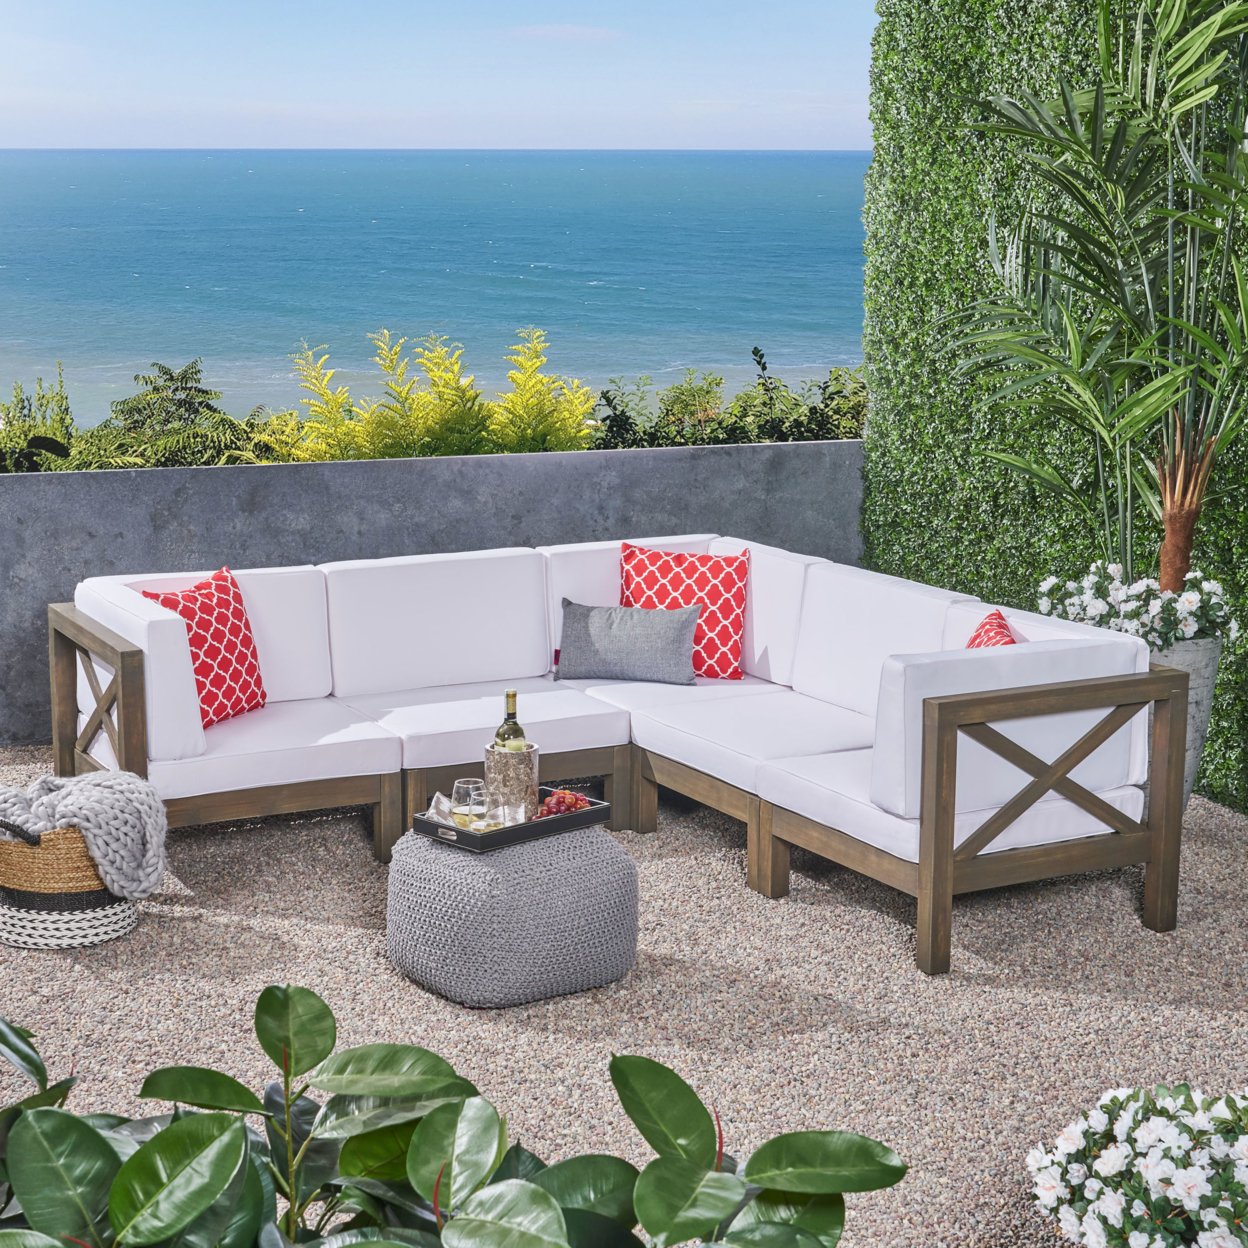 Great Deal Furniture Keith Outdoor Acacia Wood 5 Seater Sectional Sofa Set With Water-Resistant Cushions - Dark Gray